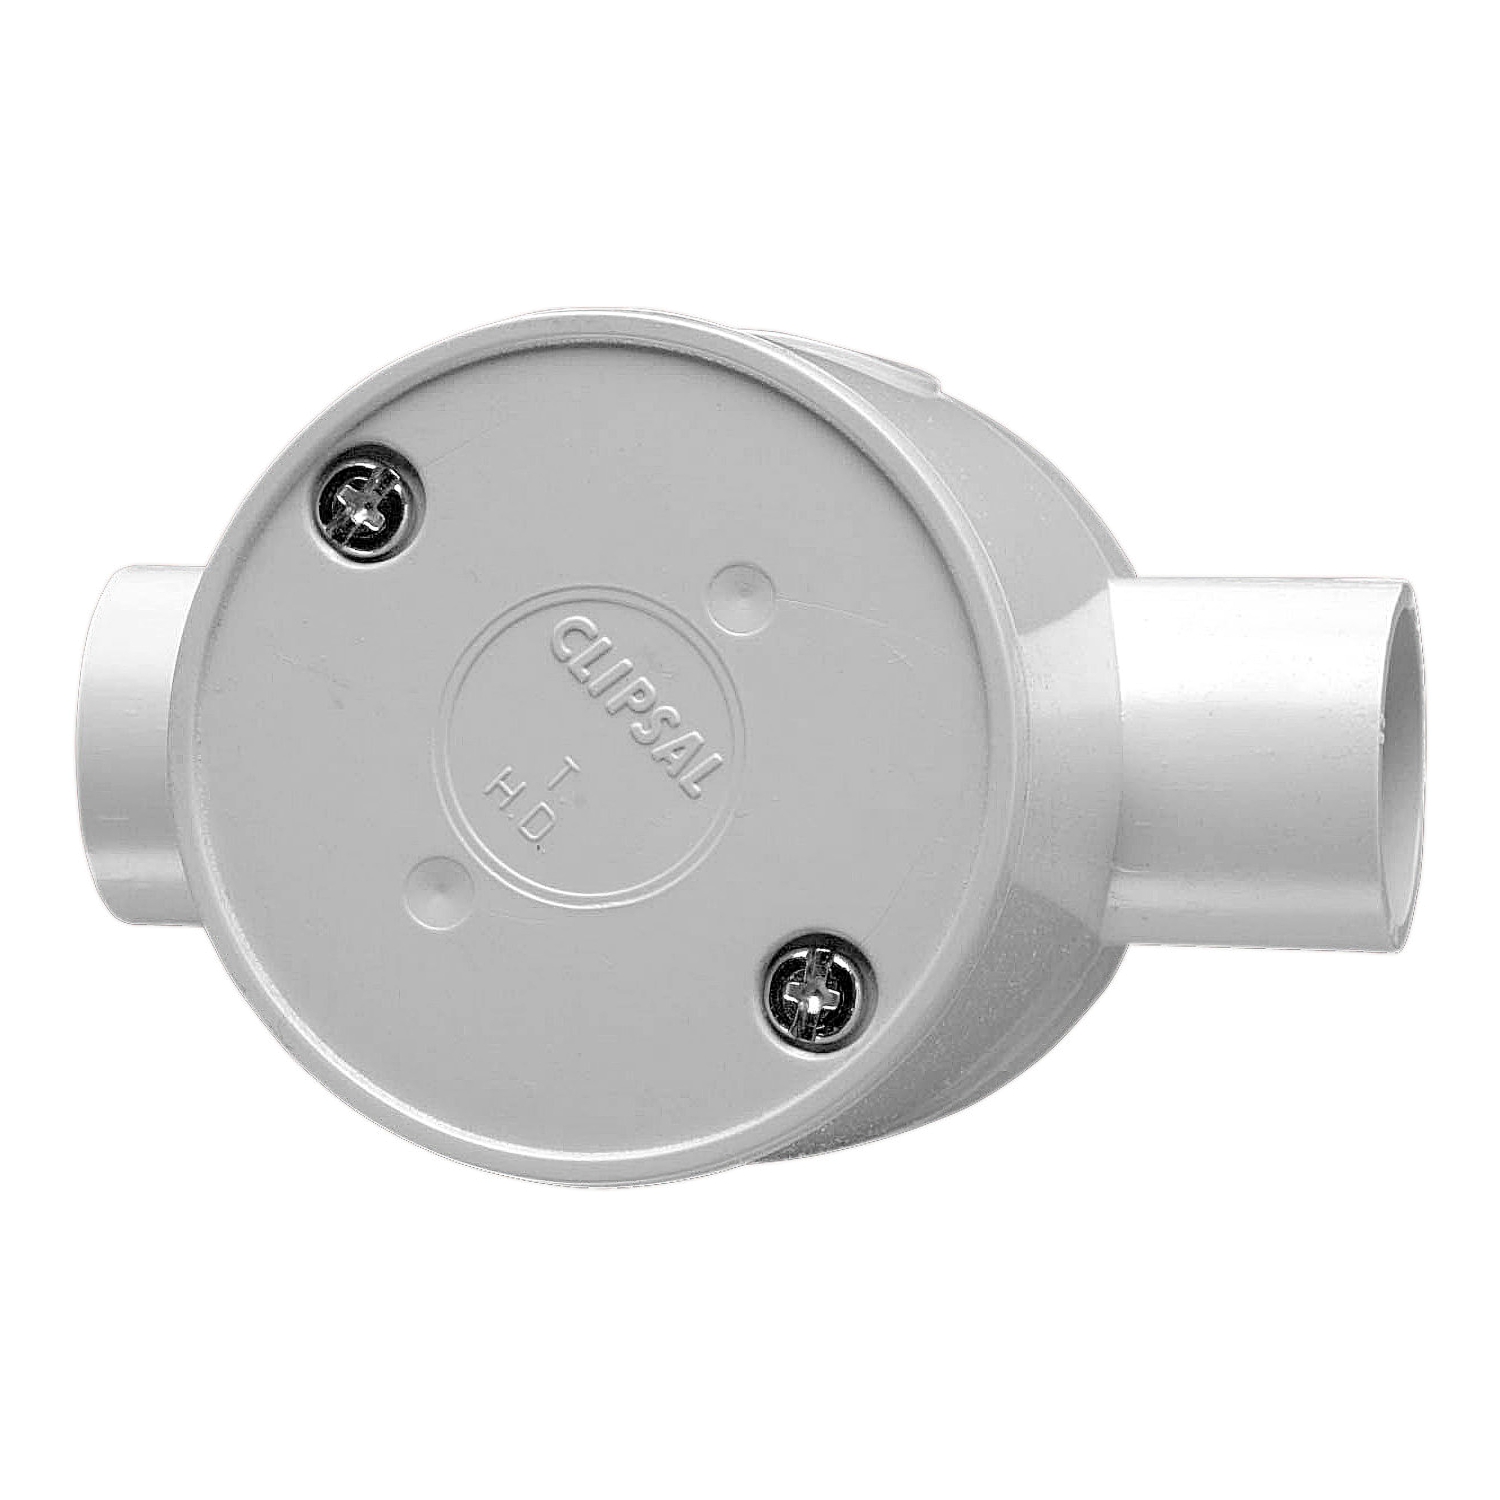 Round Junction Boxes, PVC, 25mm Entries, 2 Way through, Grey